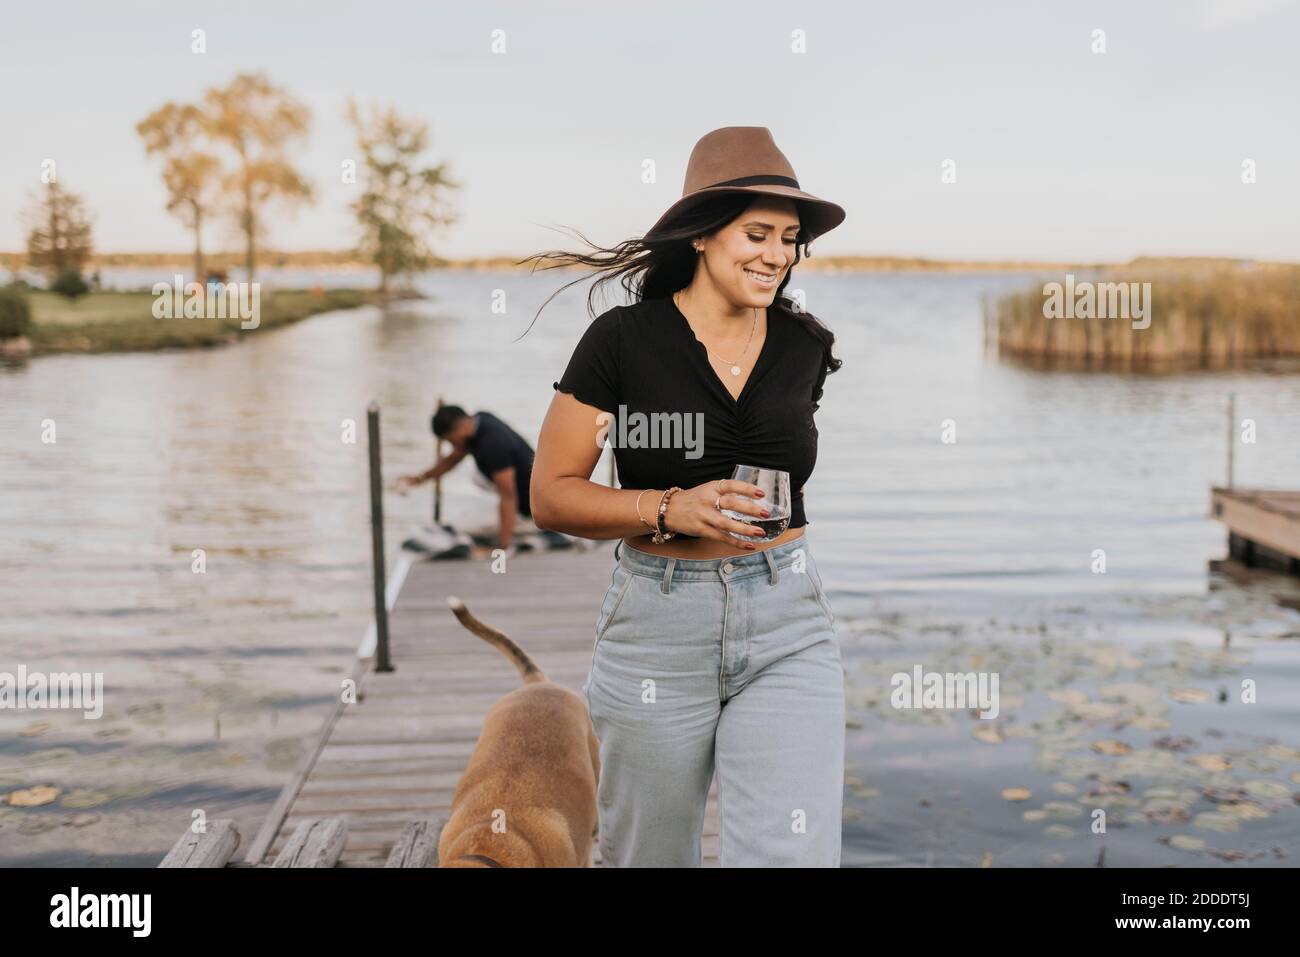 Smiling woman holding wineglass while walking with dog and man in background on pier Stock Photo